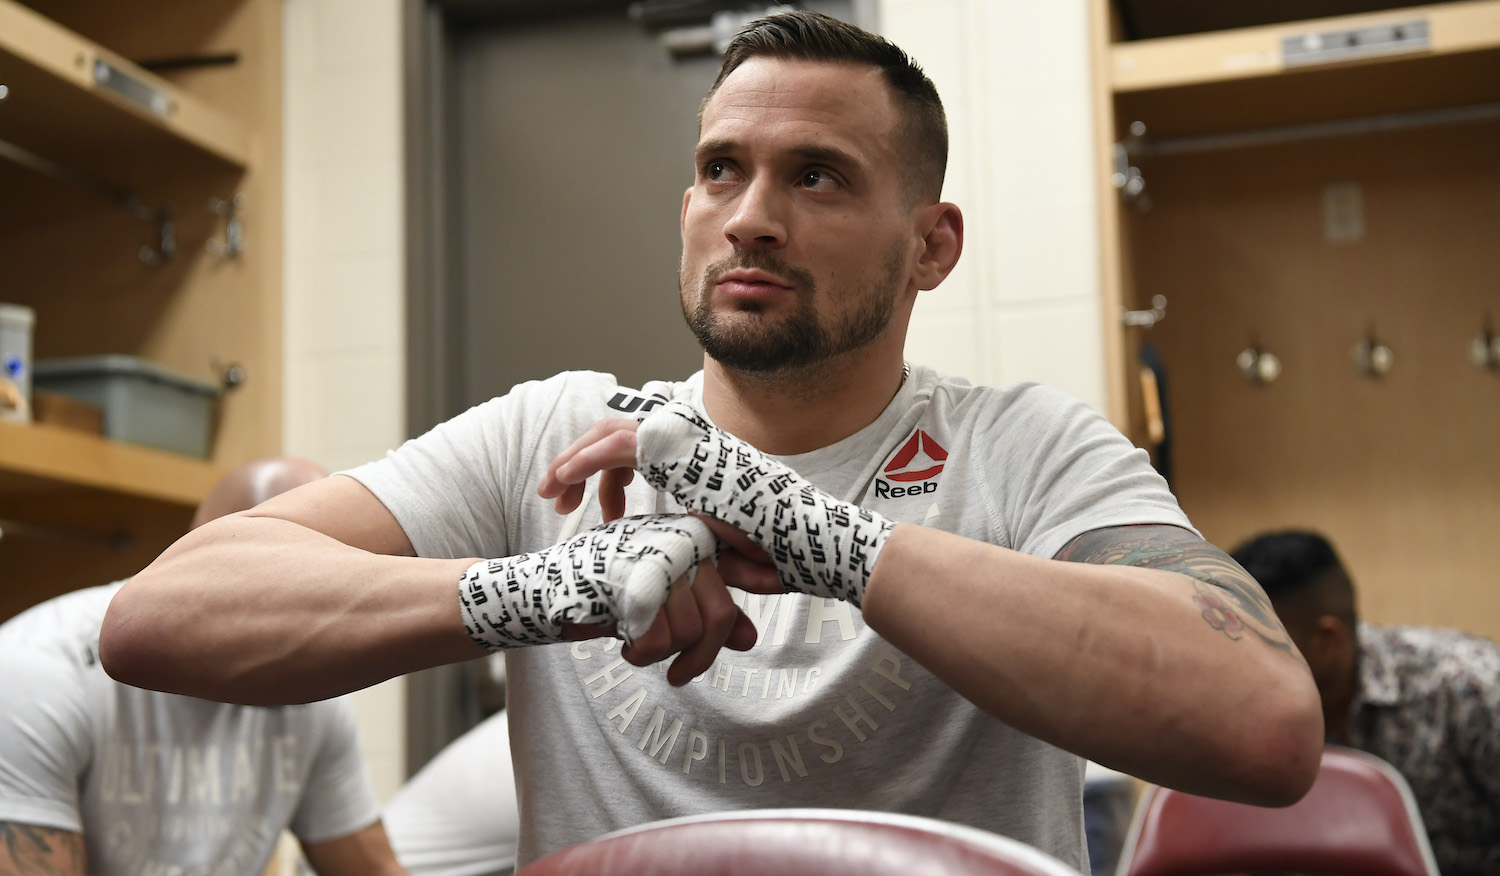 Krause gets his hands wrapped. (Photo by Mike Roach/Zuffa LLC via Getty Images)